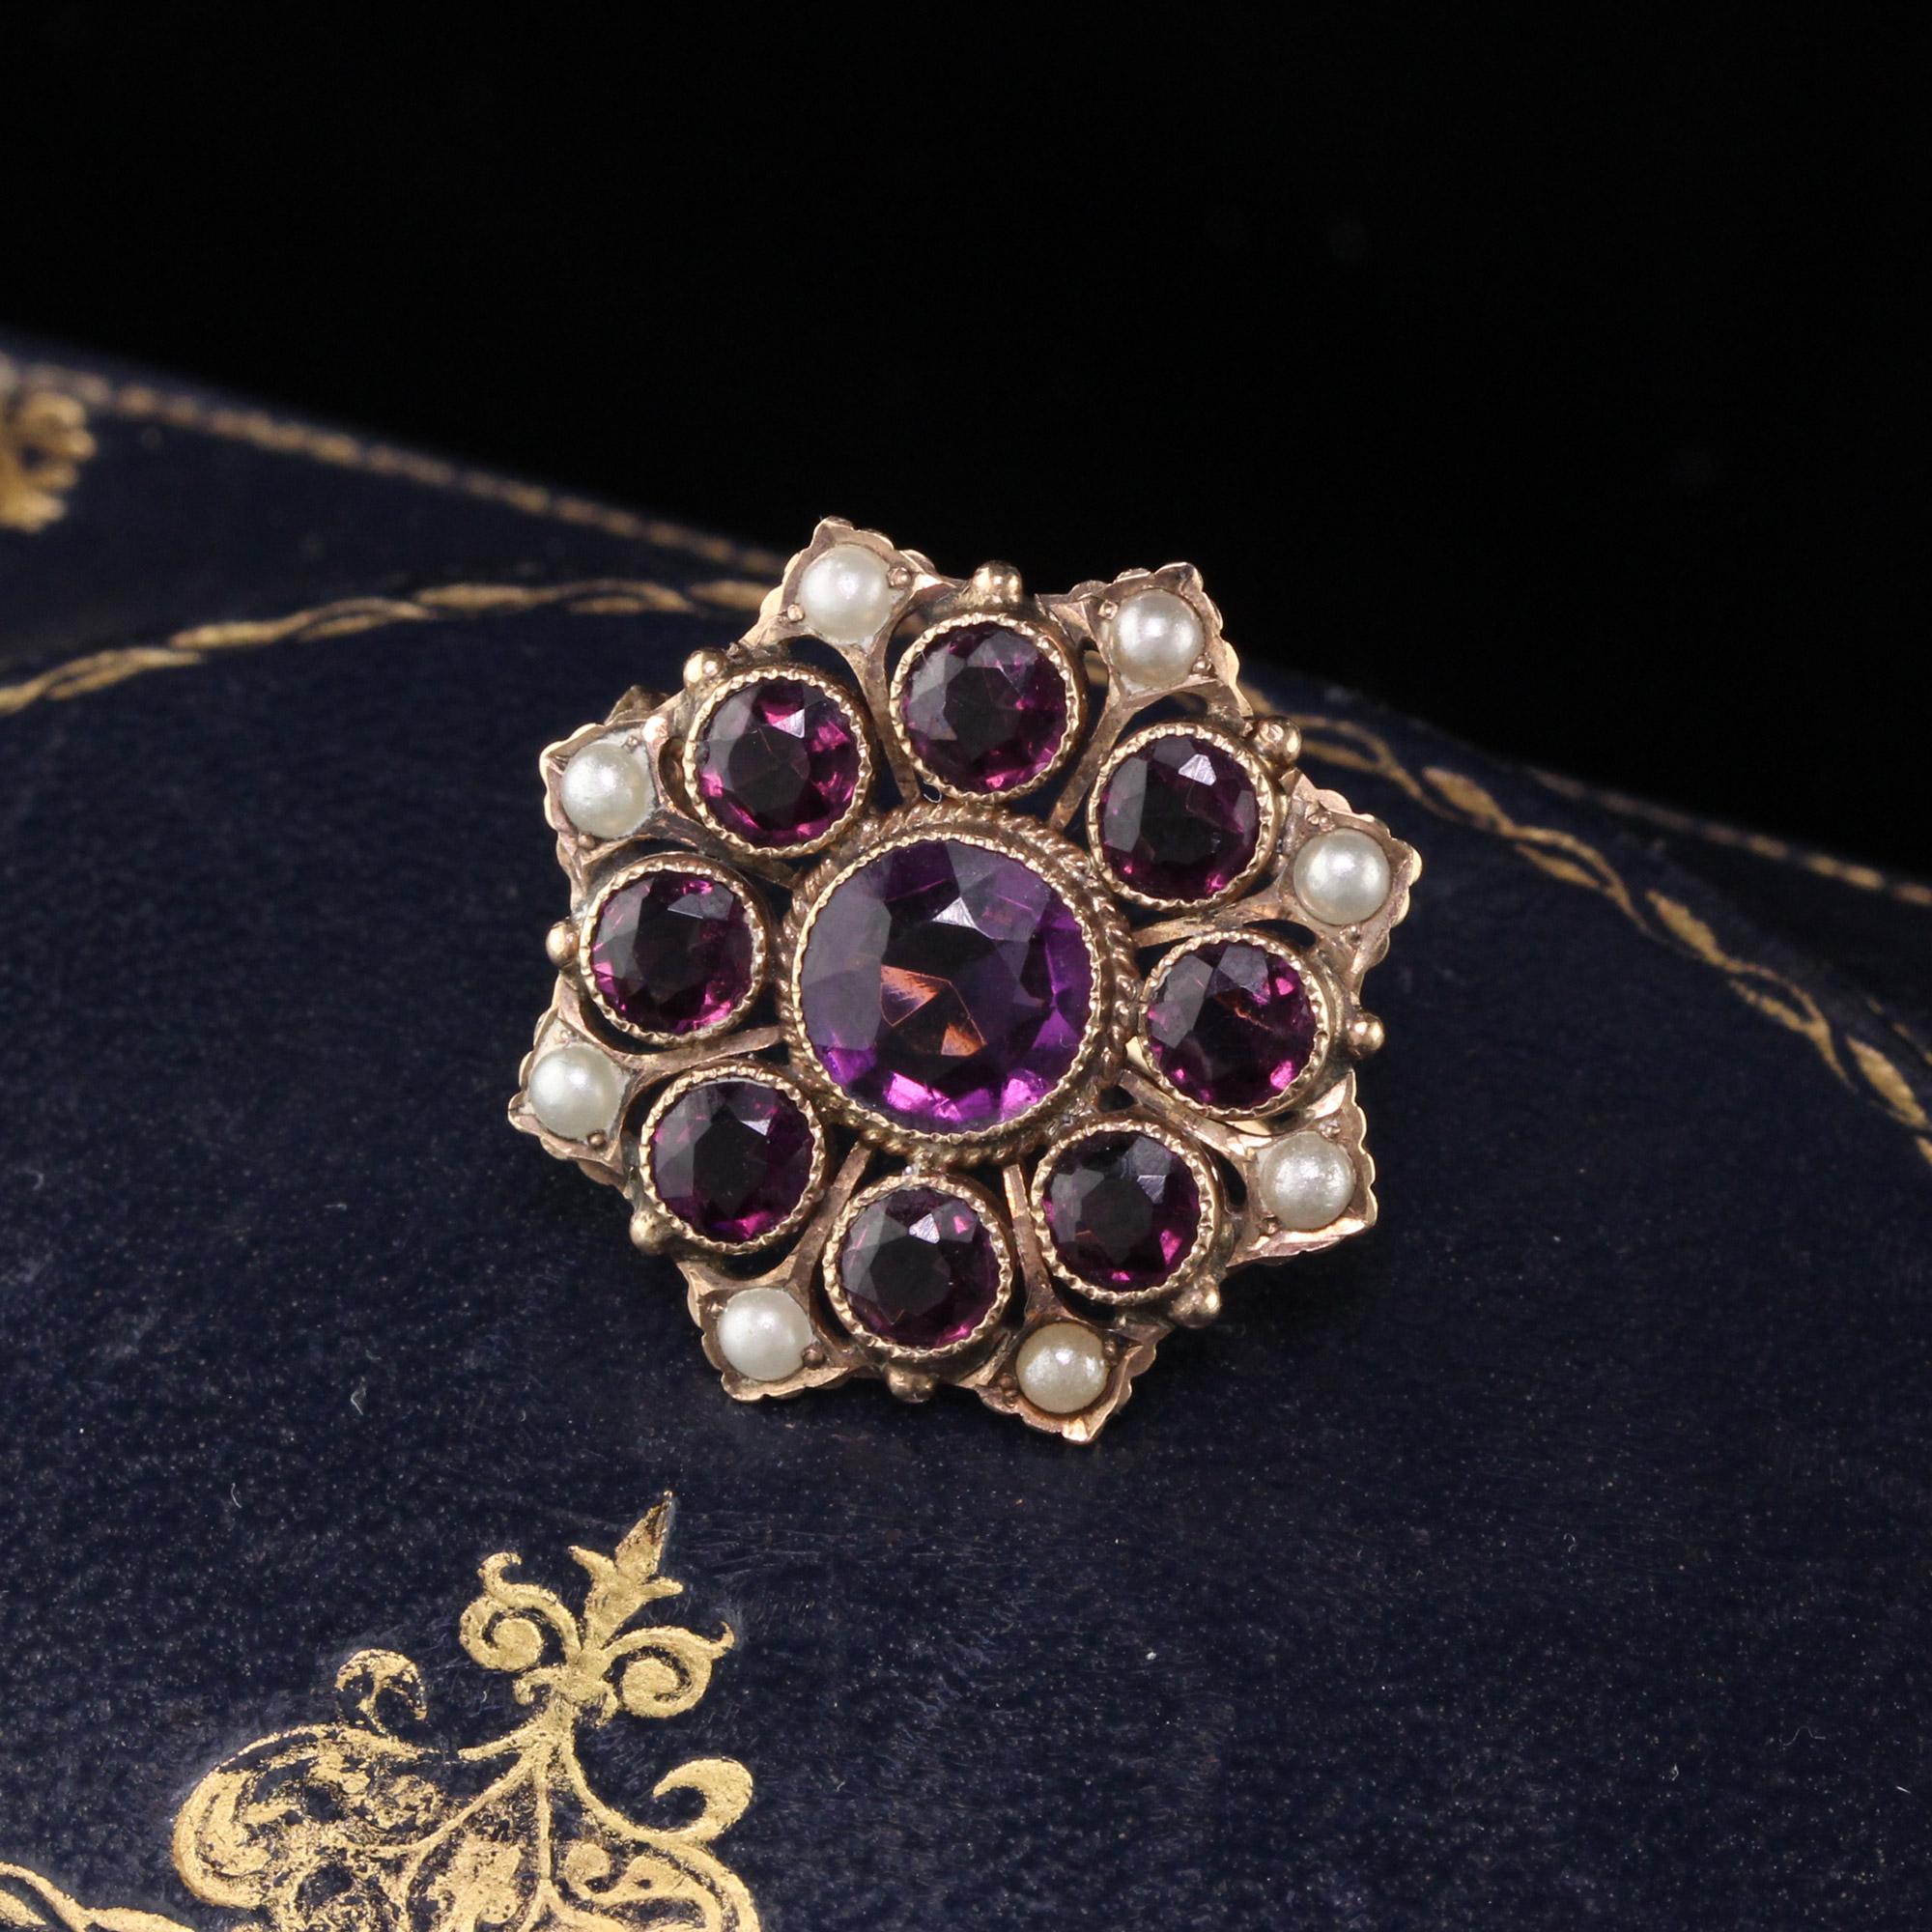 Antique Victorian brooch in a floral cluster design with amethysts and pearls. Engraved 'PAT 5-17-10'

Metal: 14K Yellow Gold 

Weight: 3.5 Grams 

Measurements: 23 mm diameter